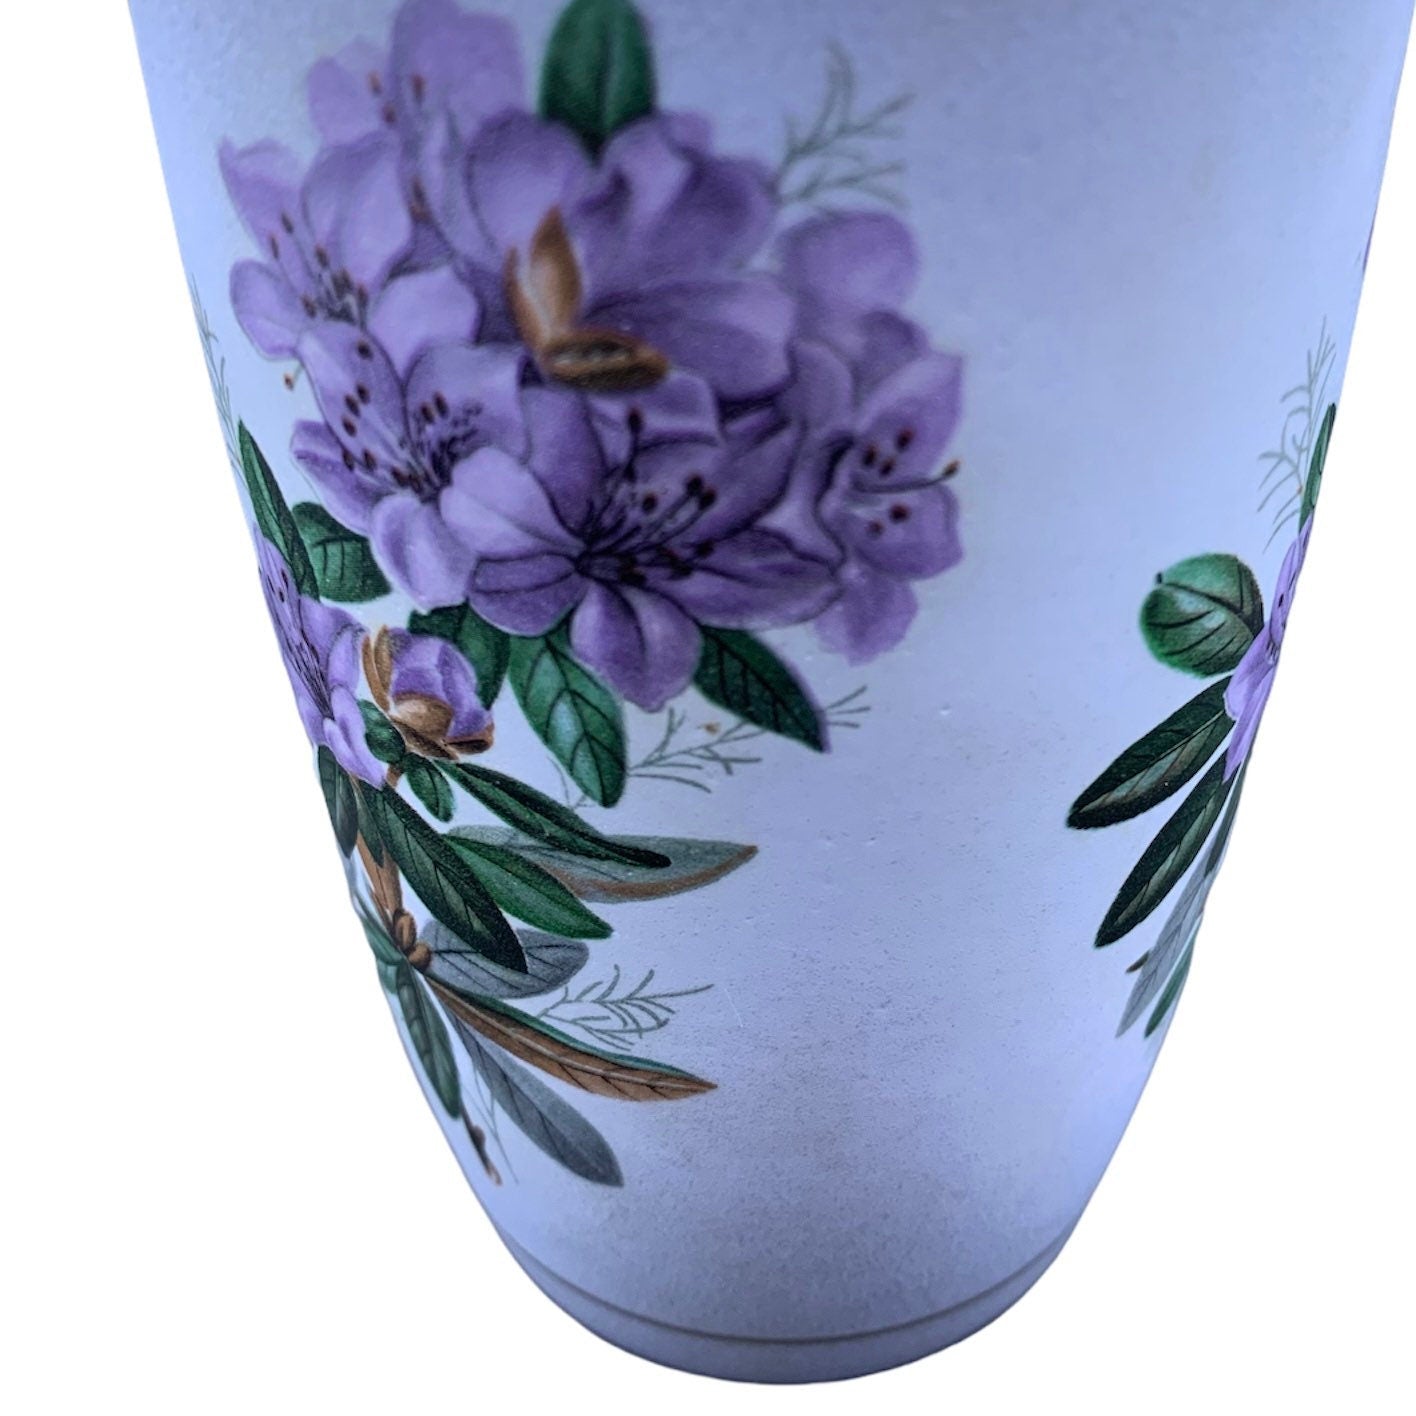 Vintage Flora Gouda Holland Rhododendron Vase | Mid Century Hand Painted Pottery